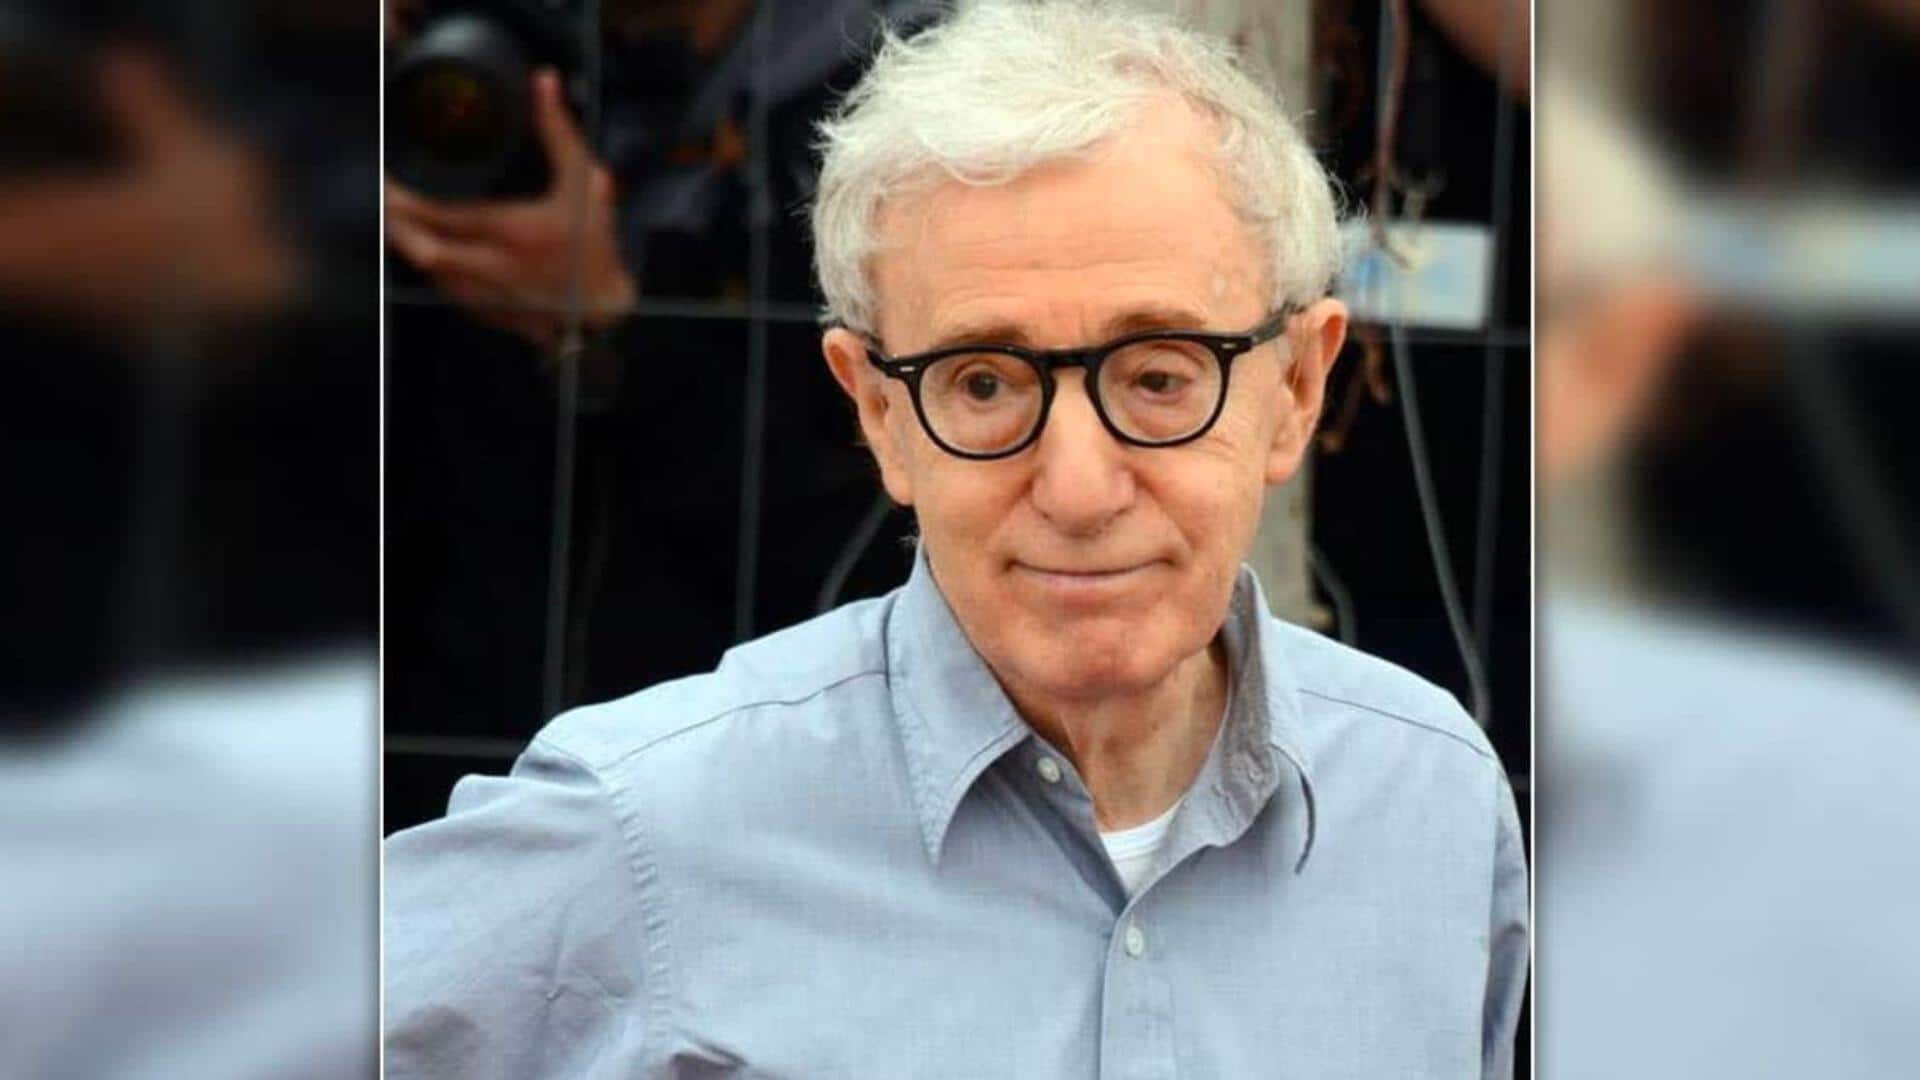 Woody Allen sparks retirement rumors, calls cancel culture 'silly'